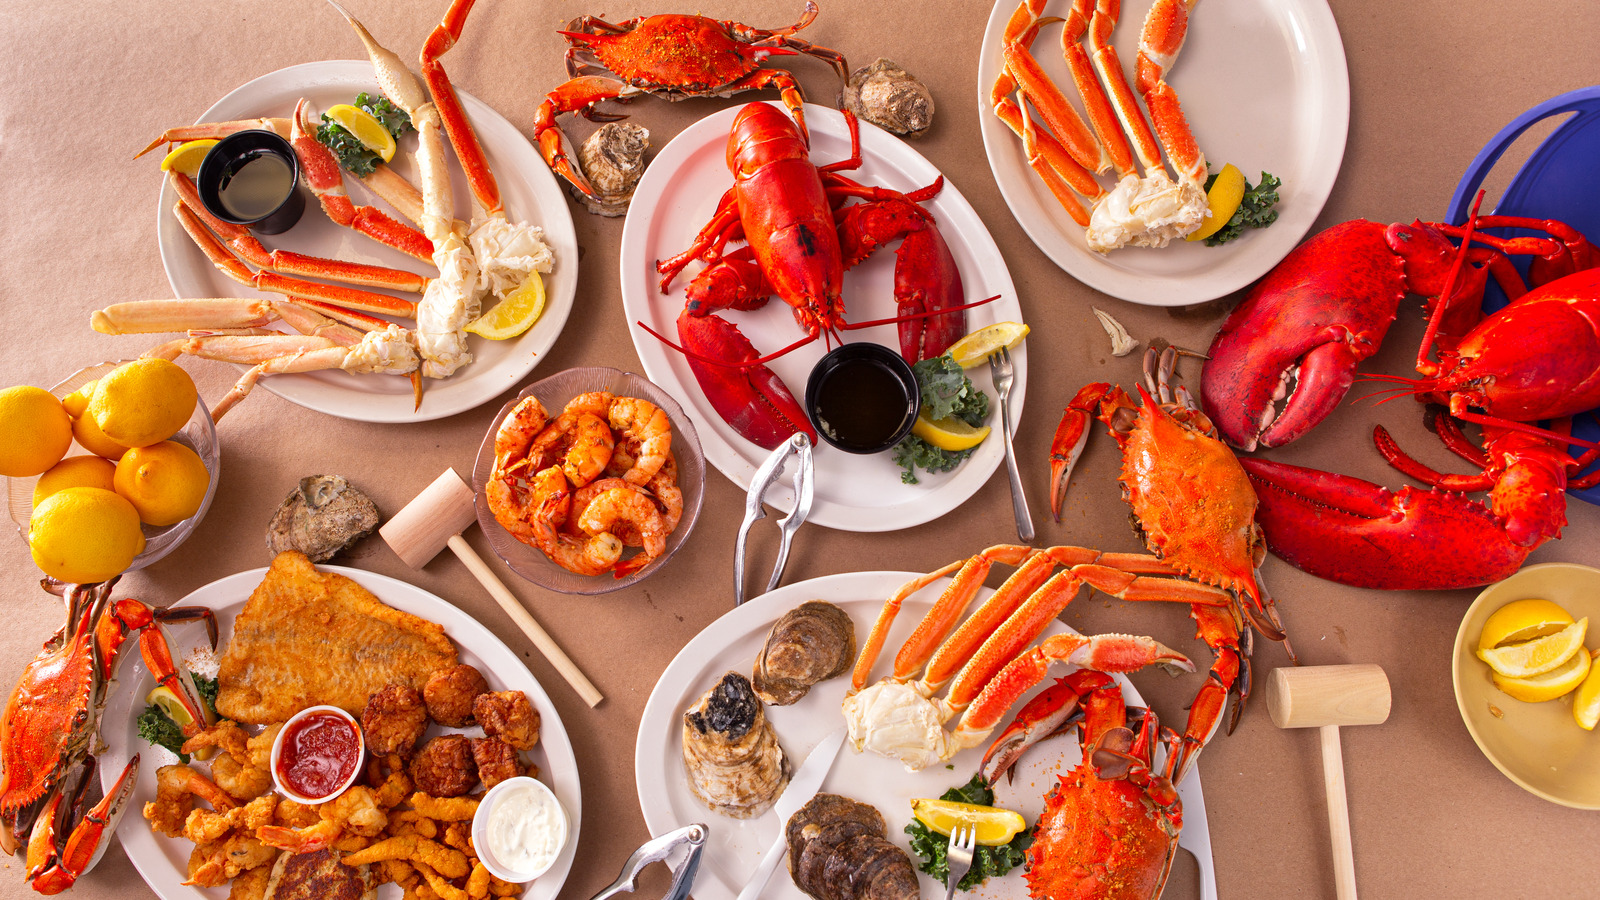 https://www.thedailymeal.com/img/gallery/12-of-the-best-seafood-restaurant-chains-in-the-us/l-intro-1697738995.jpg